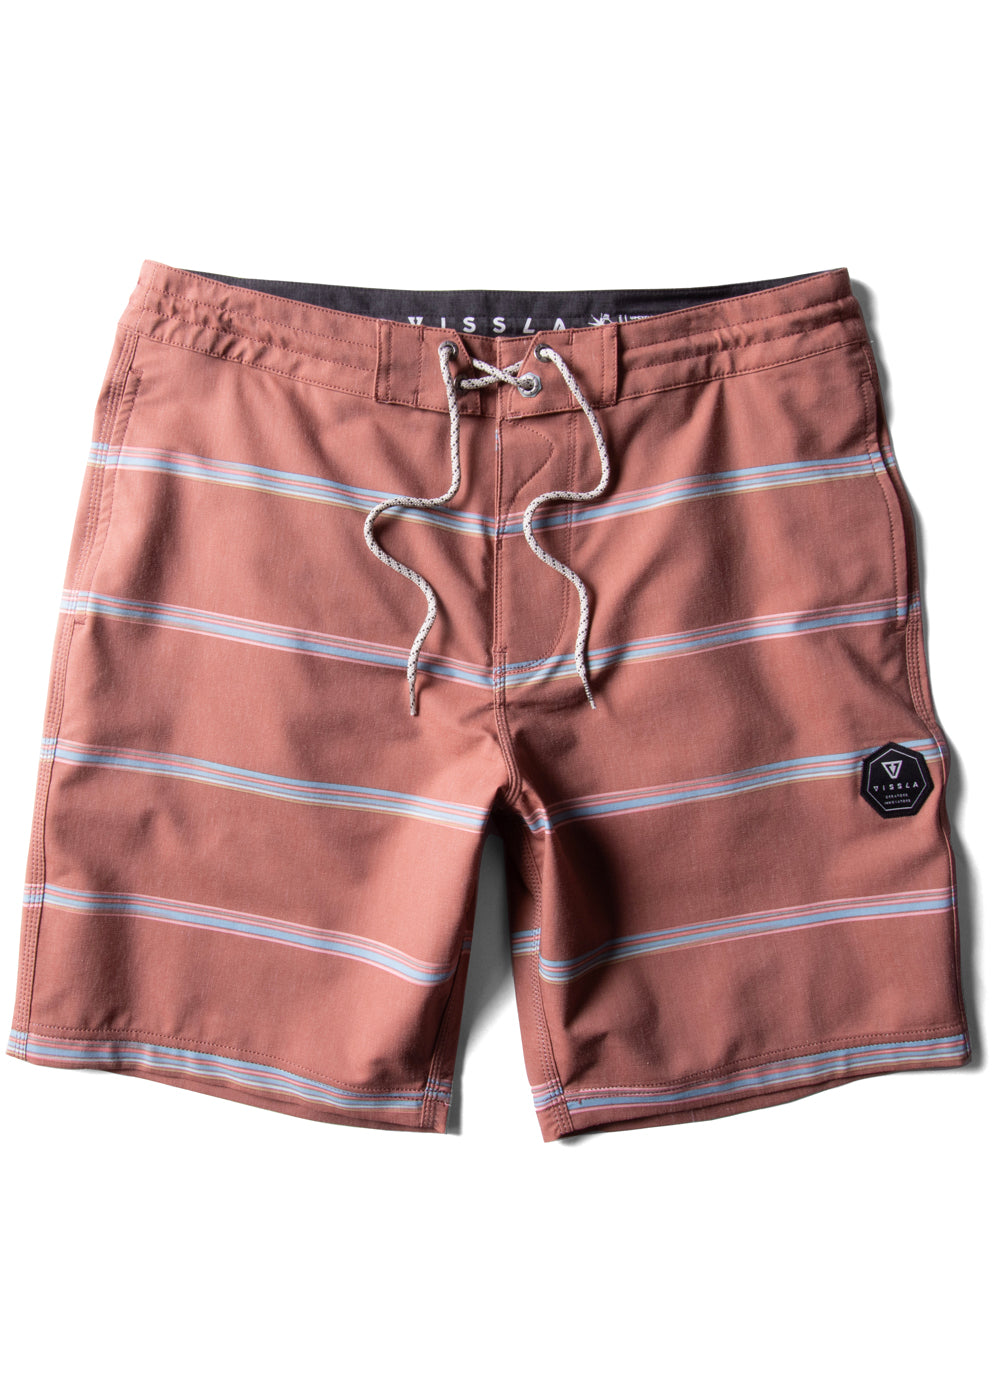 Spaced Out 17" Boys Boardshort